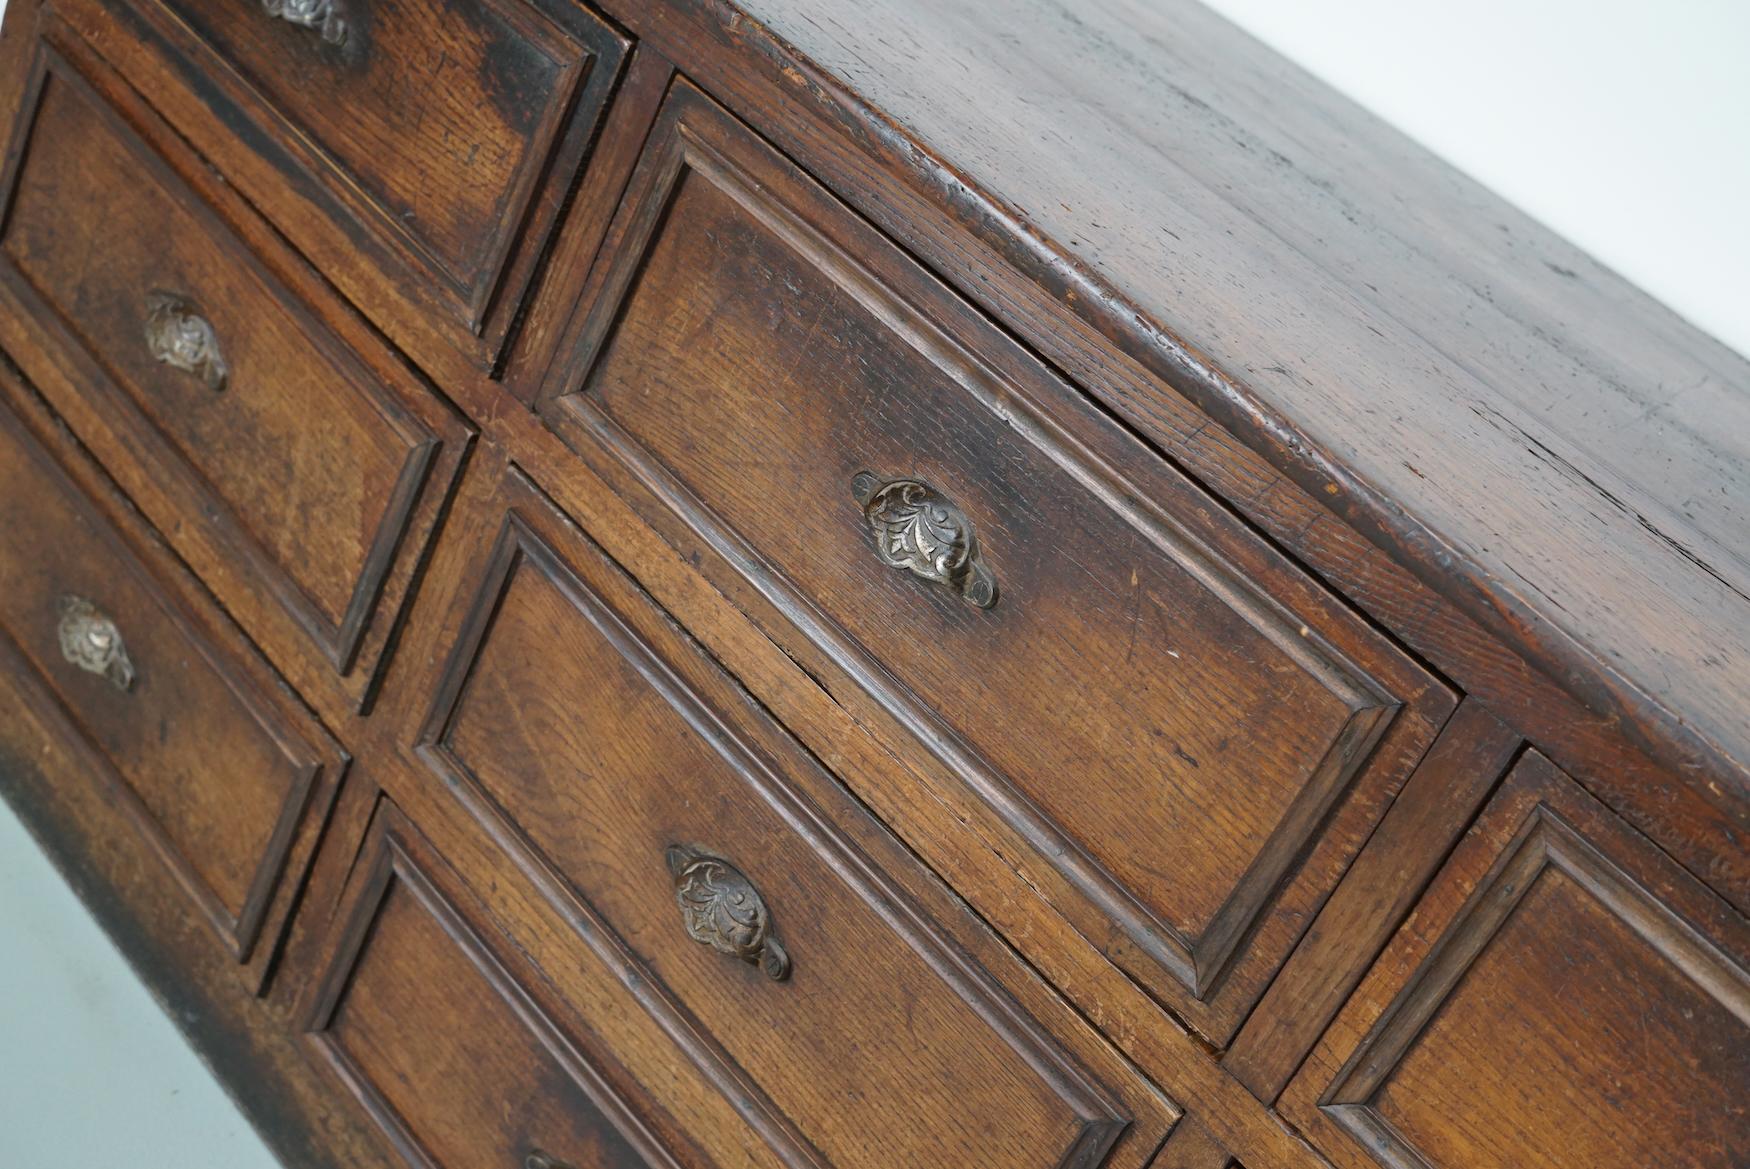 This apothecary cabinet was made in the early 20th century in France from oak and fruitwood. It features 9 large drawers with ornate cast iron handles. The interior dimensions of the drawers are: DWH 50 x 46 x 18 cm.